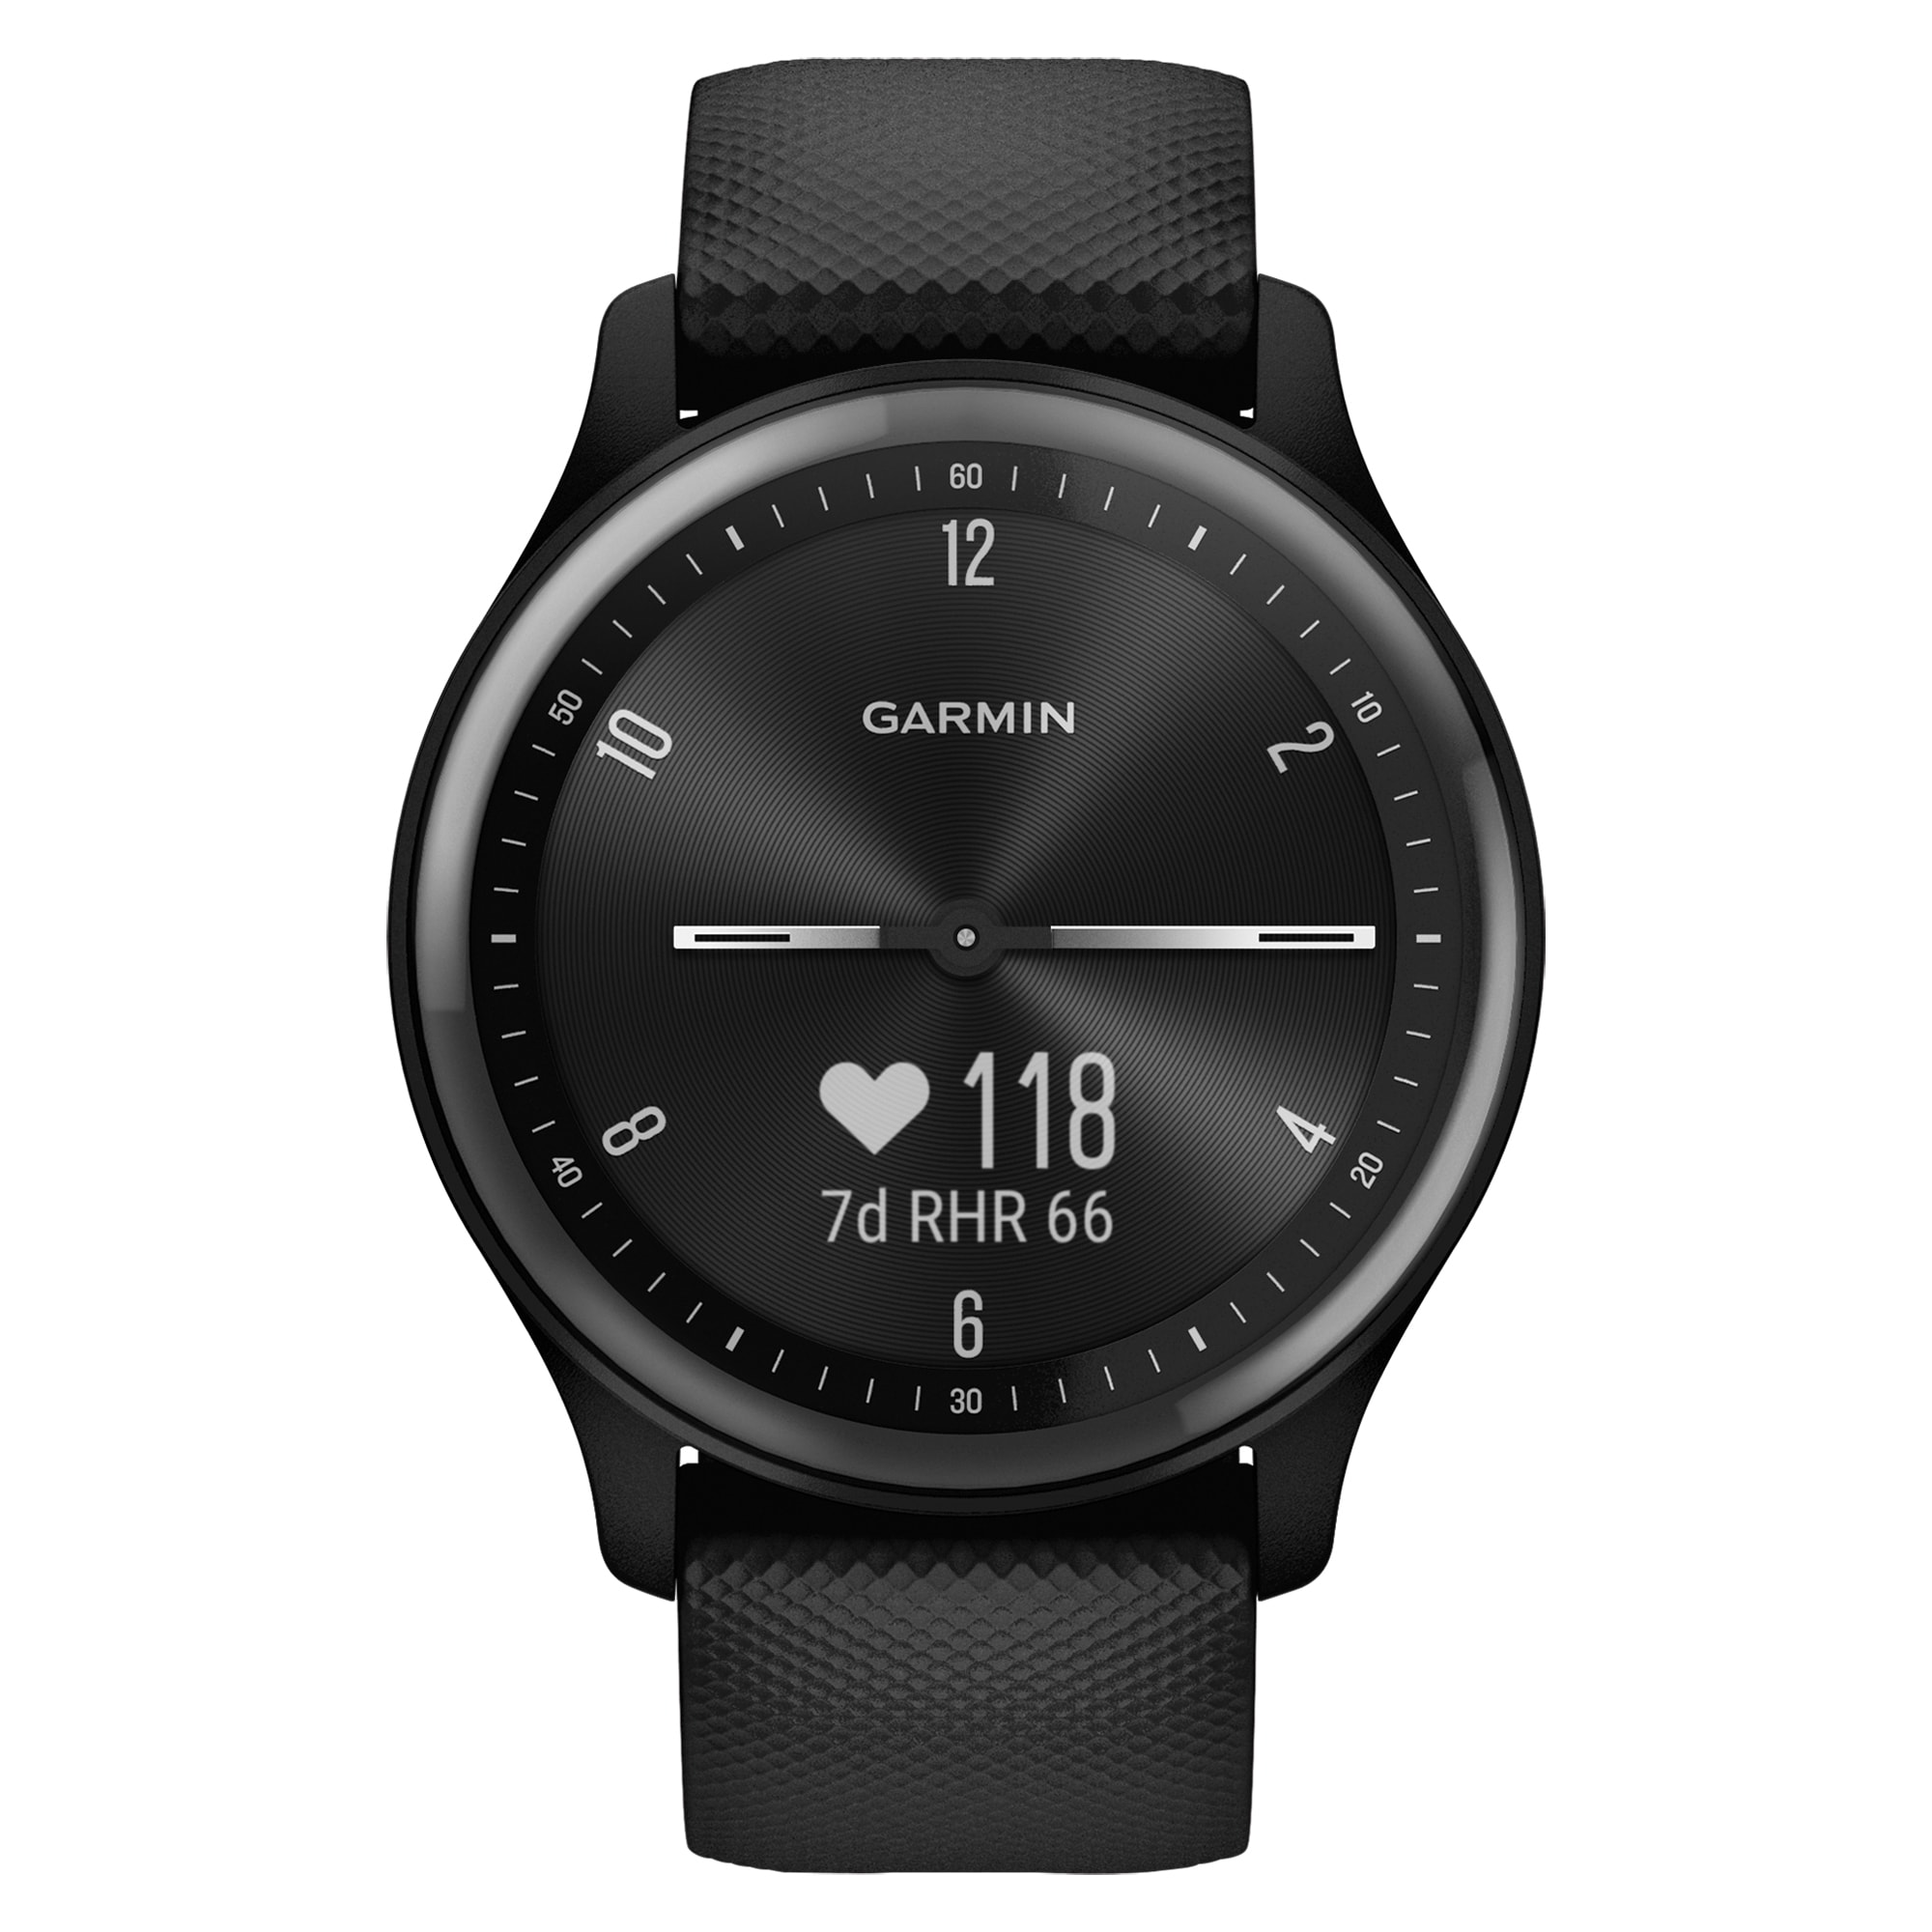 Fitness Accents) (Black Garmin in Sport Case, Trackers Smartwatch Band with Silicone vívomove the at department Slate